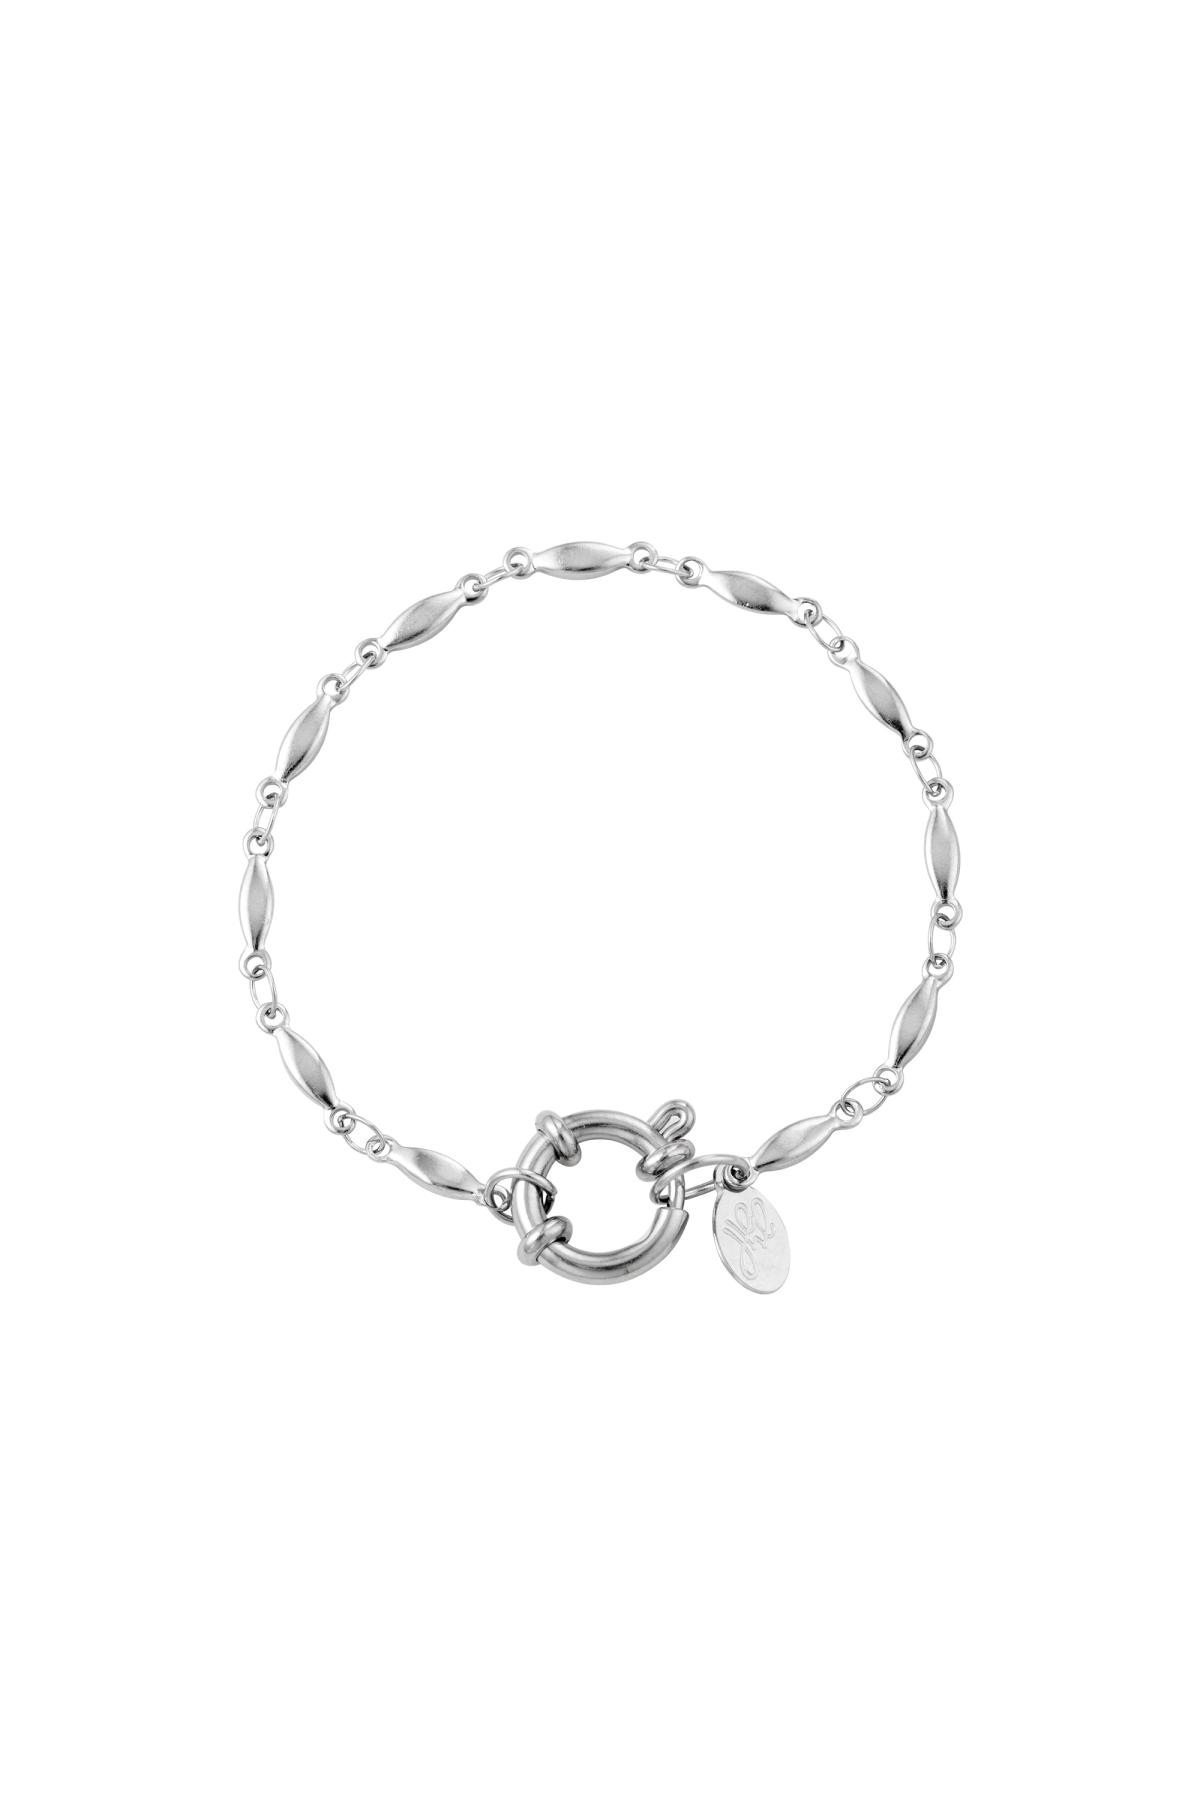 Bracelet oval chain Silver Stainless Steel